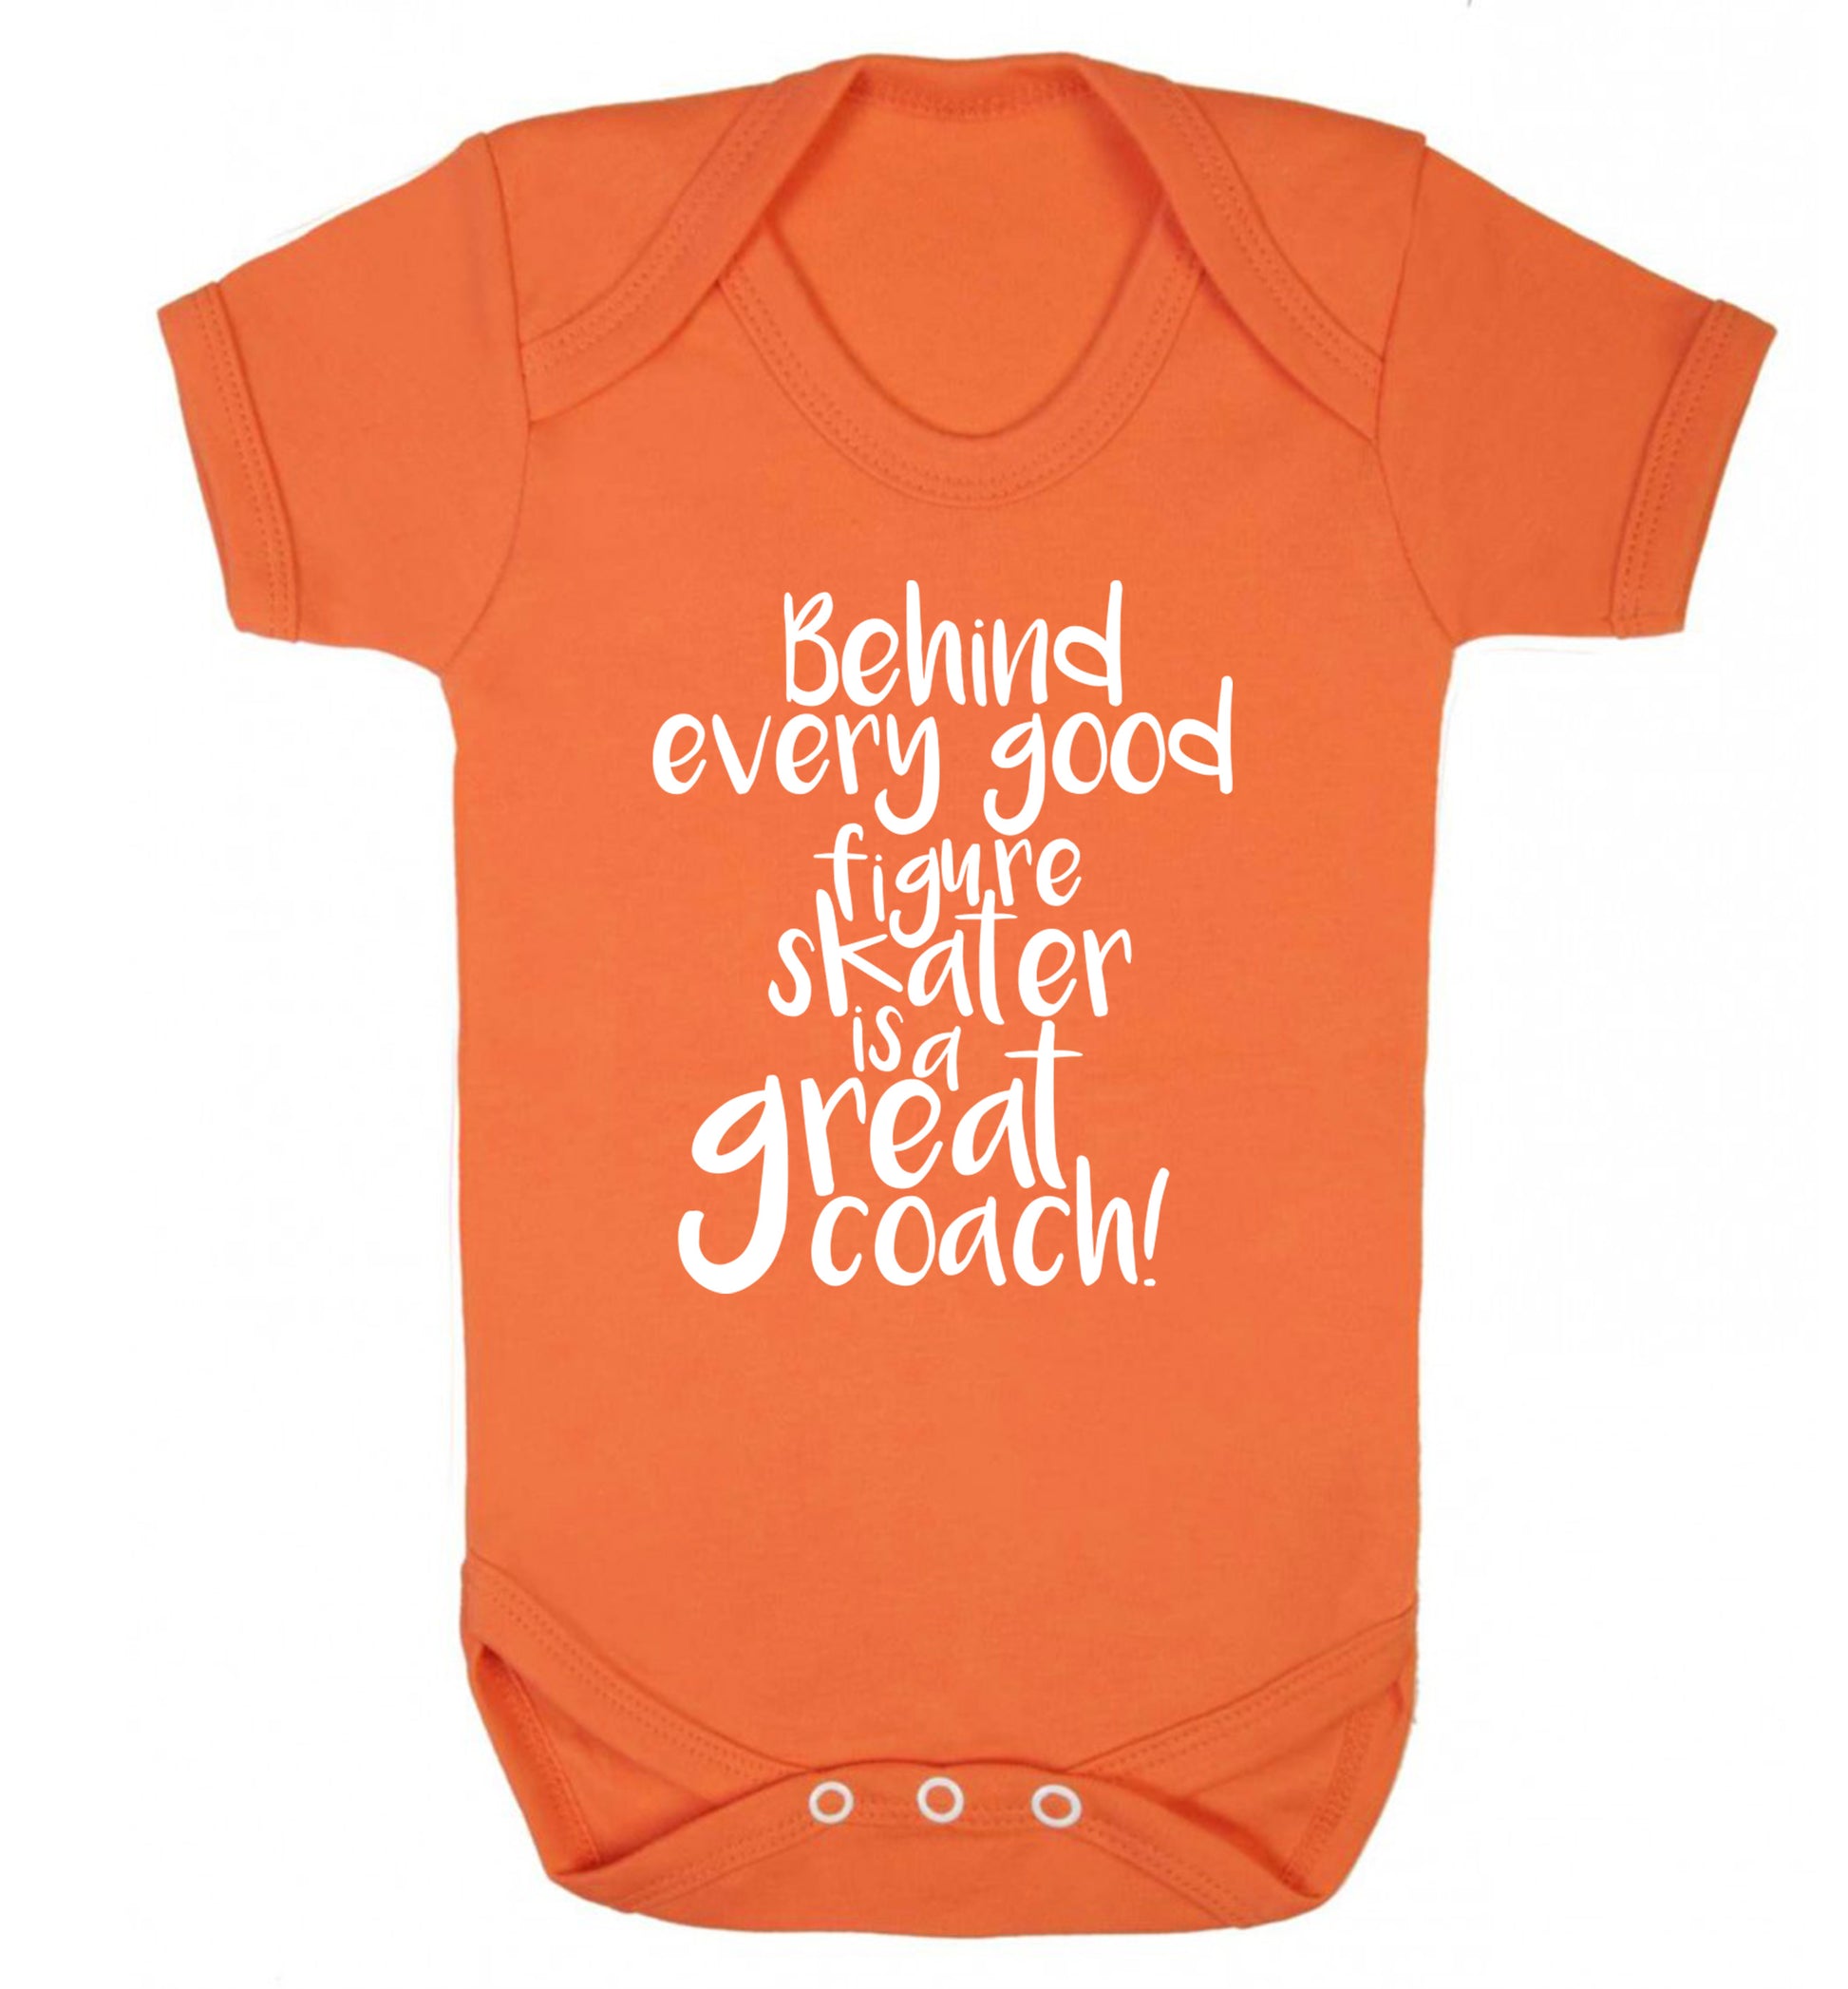 Behind every good figure skater is a great coach Baby Vest orange 18-24 months